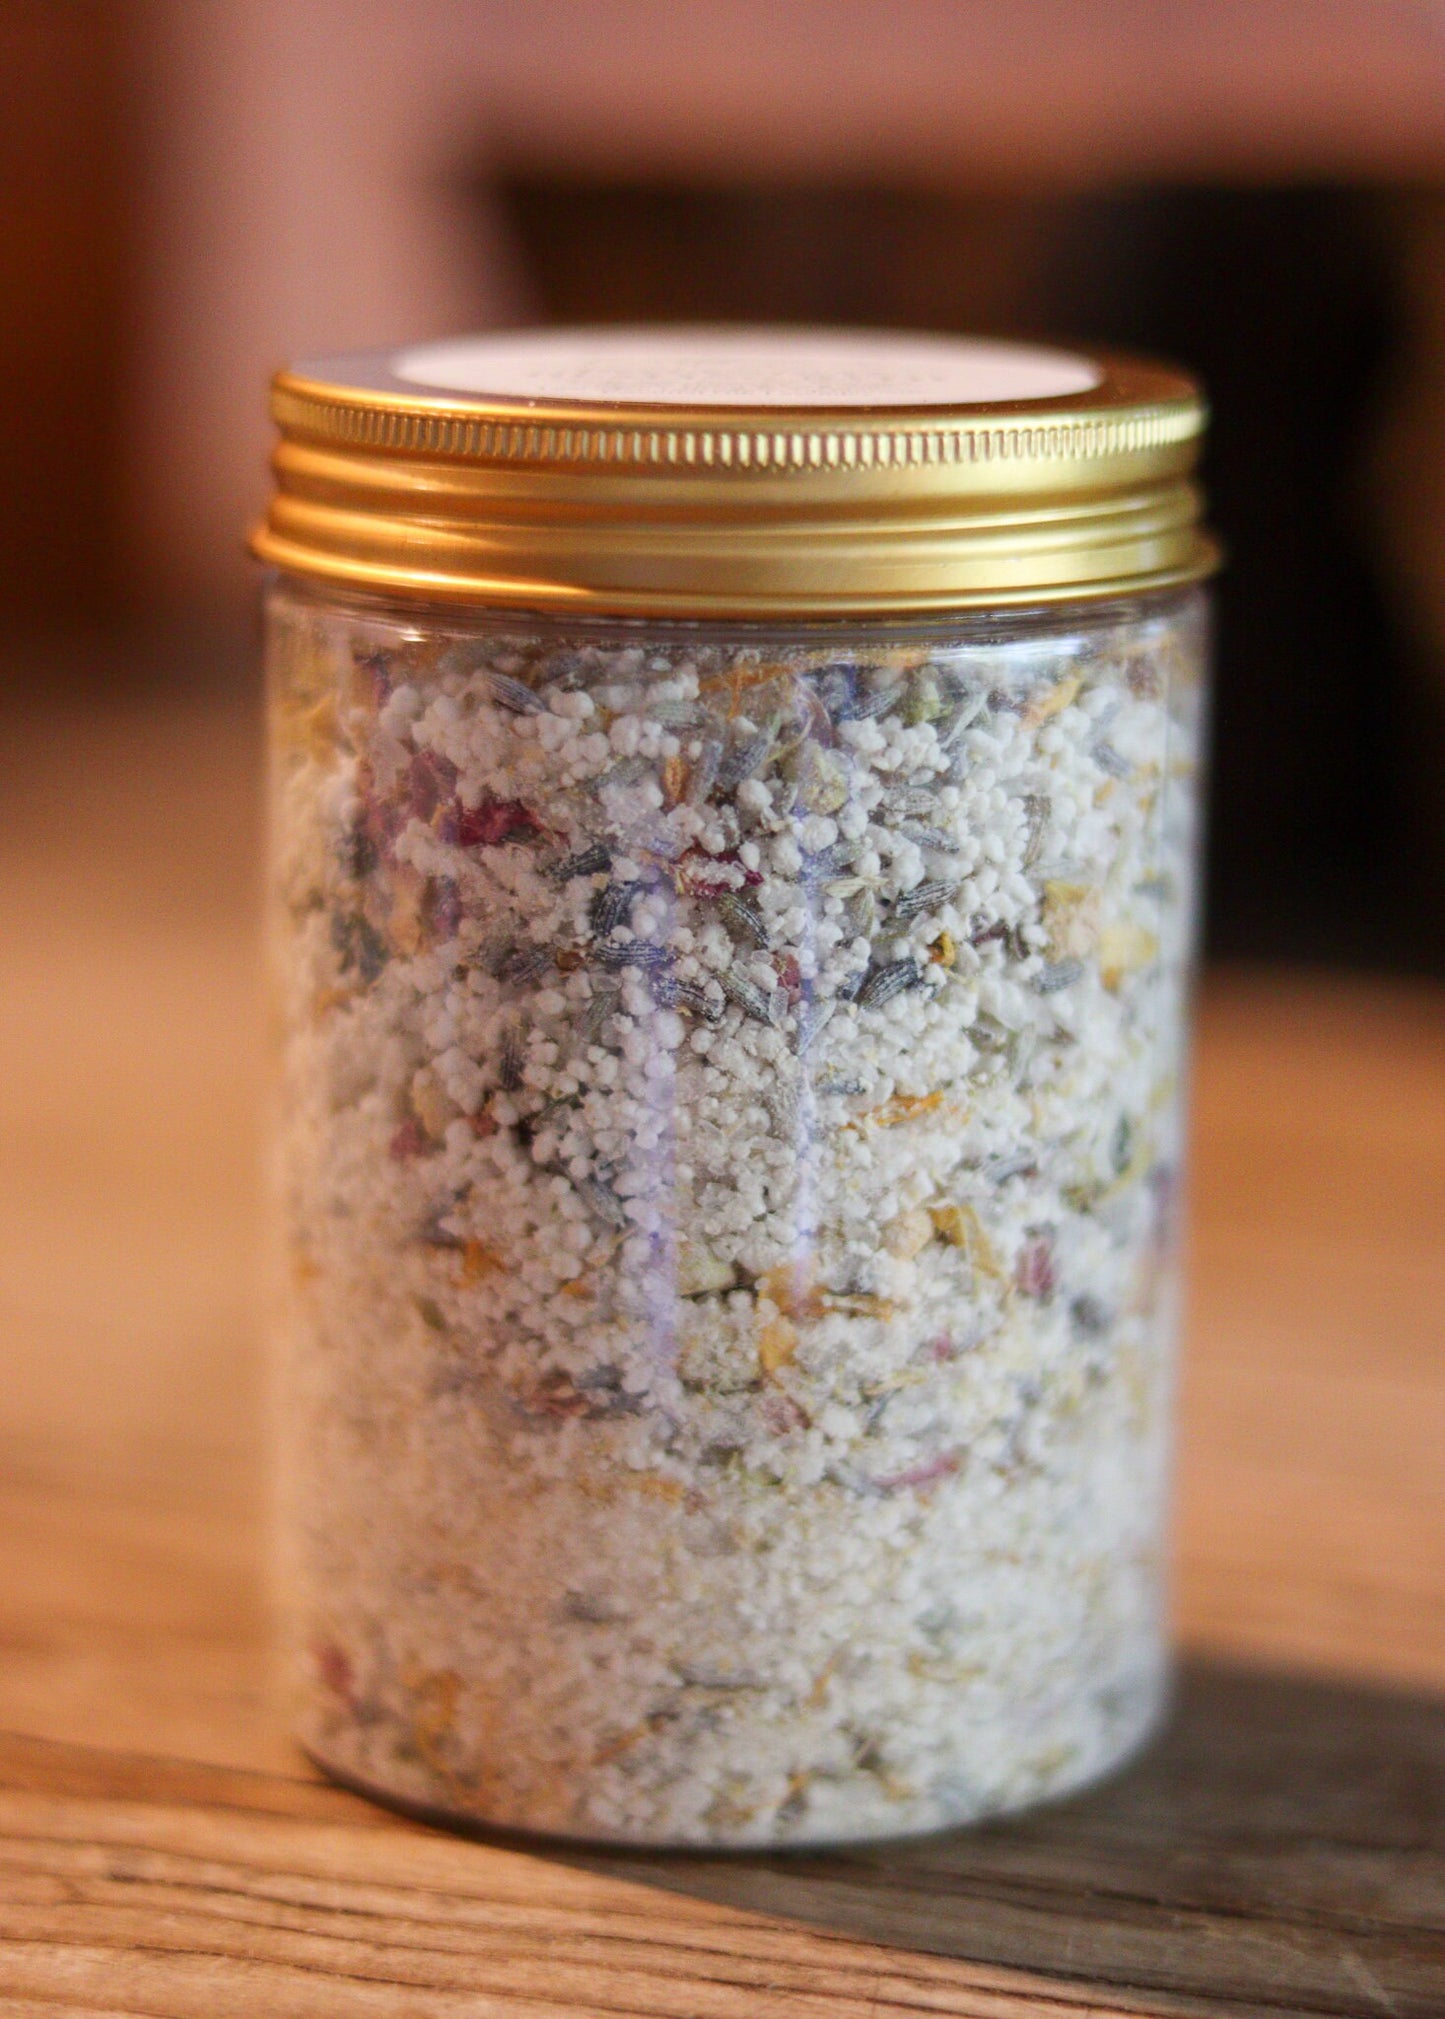 BATH SALTS with Herbs and Essential Oils - Sore Muscle Relief and Relaxing Blend